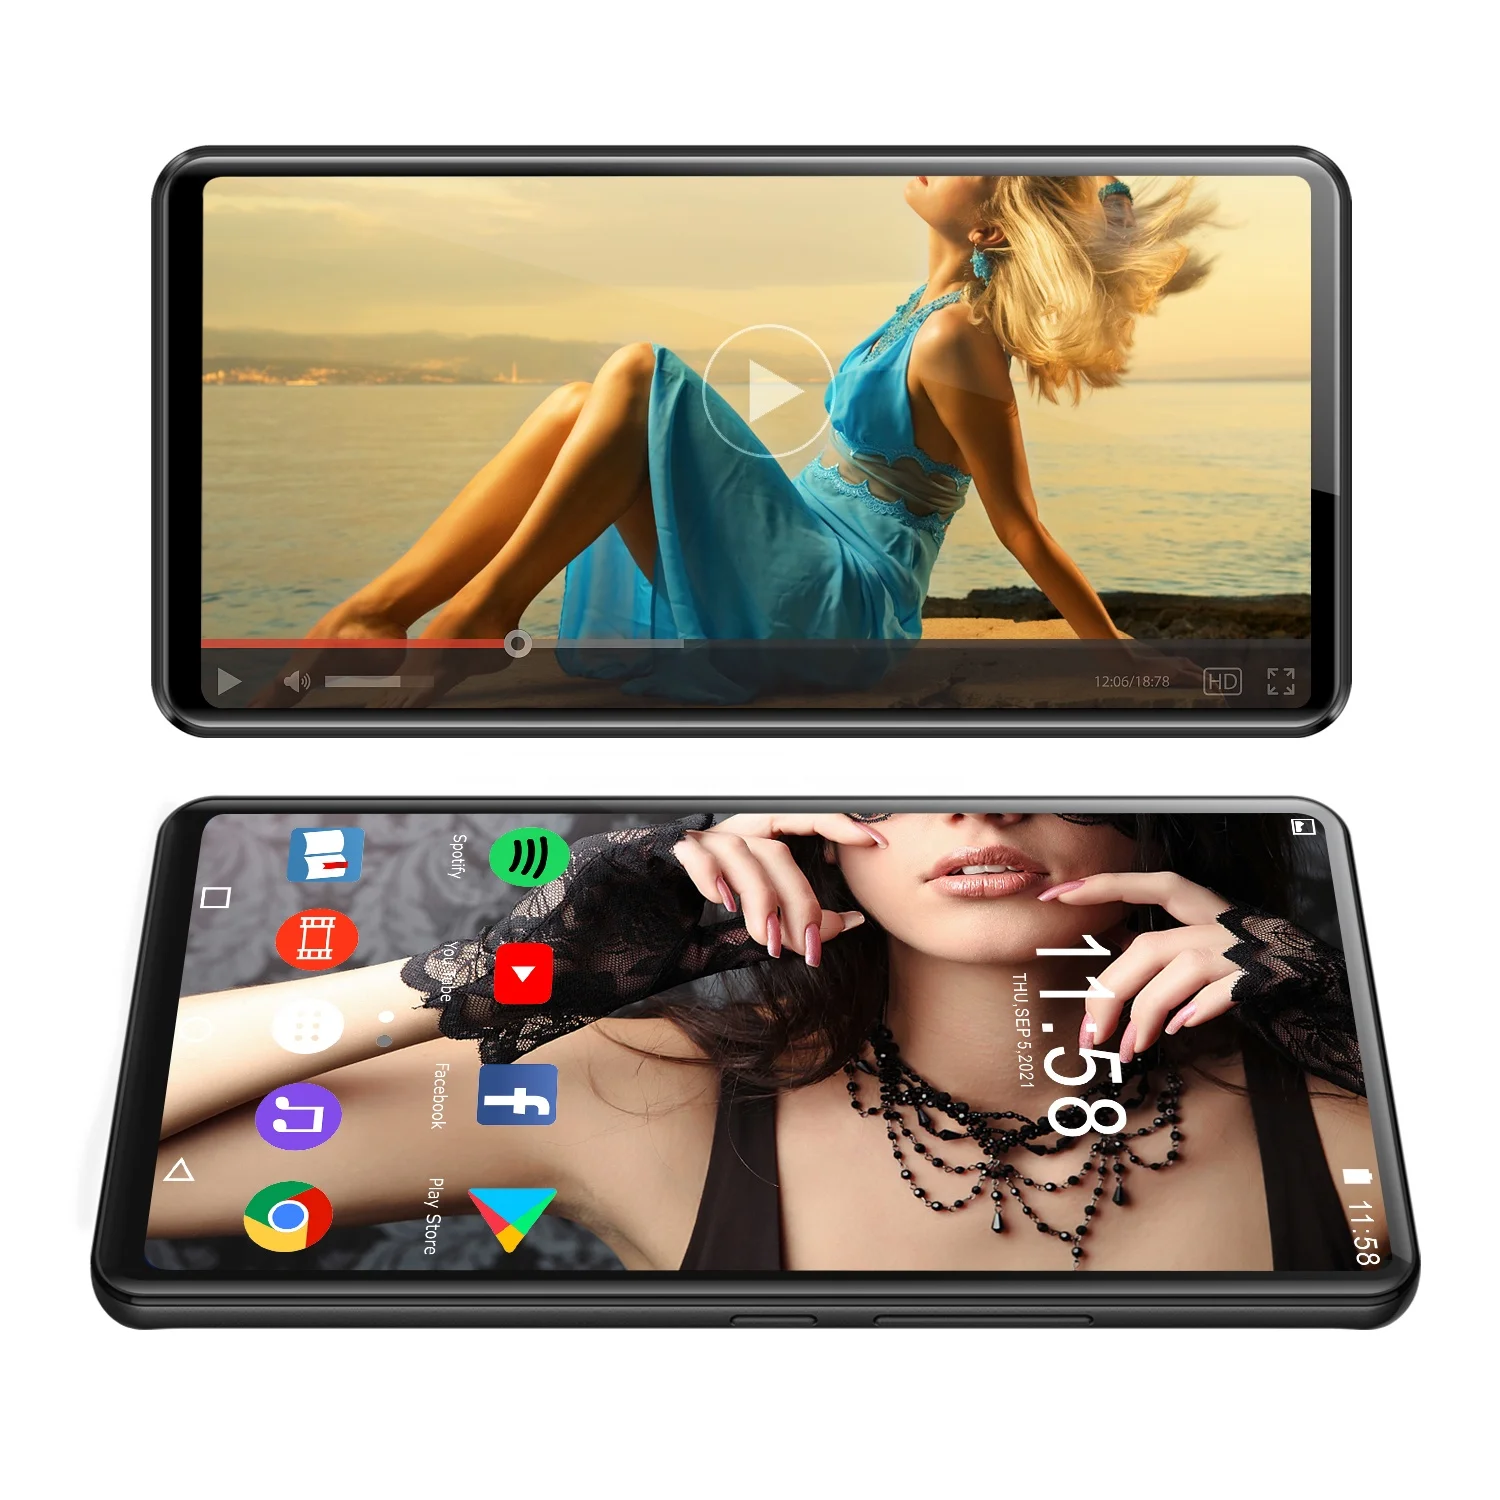 

S21 6 inches HD Bt WIFI Android Hot Sexy Download Touch screen Mp5 Movie Media Music Video Player Mp3 Mp4 players, Gray/customize